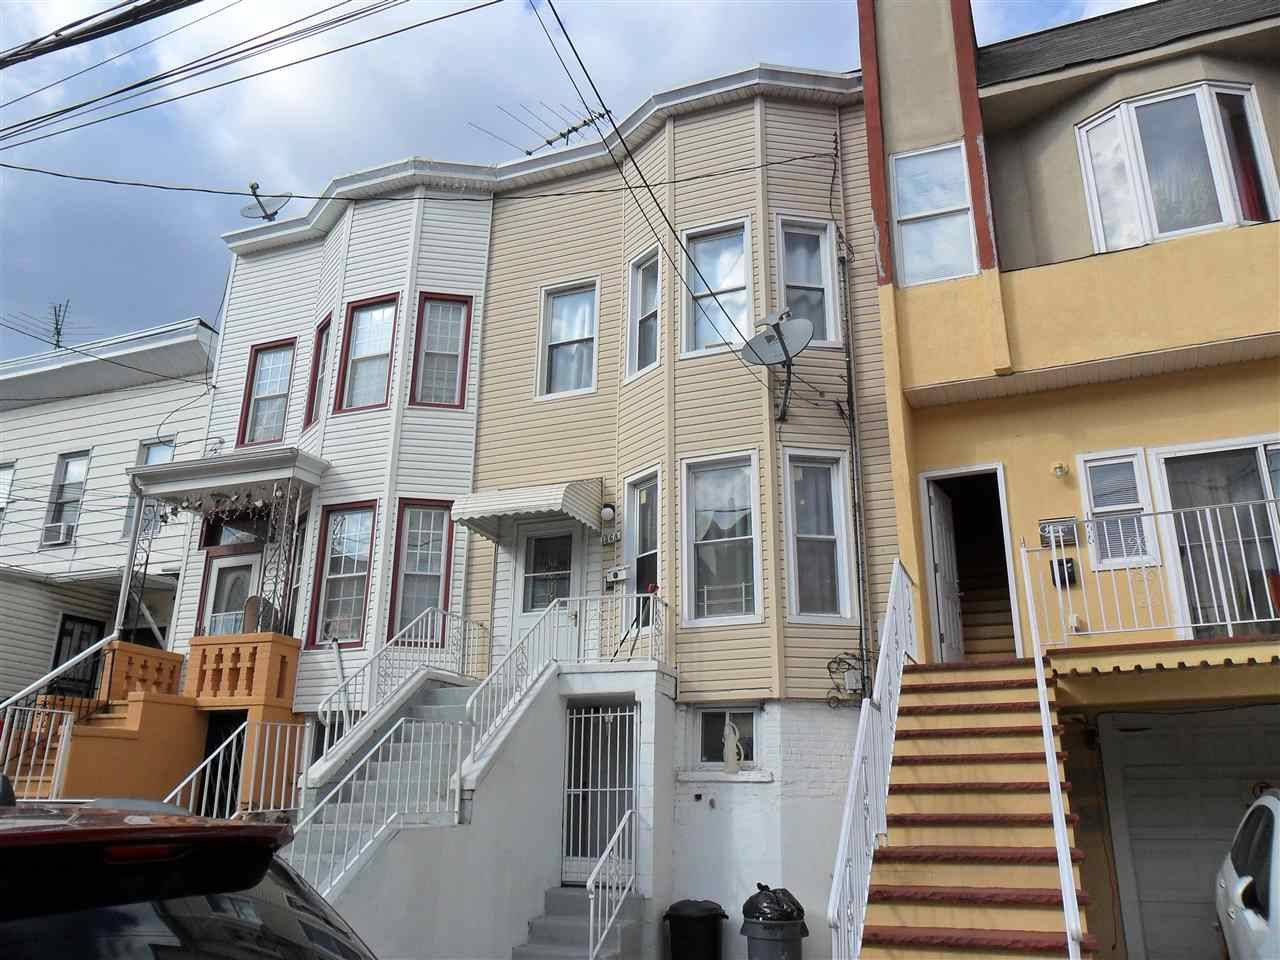 Large One Family in a nice neighborhood - 3 BR New Jersey